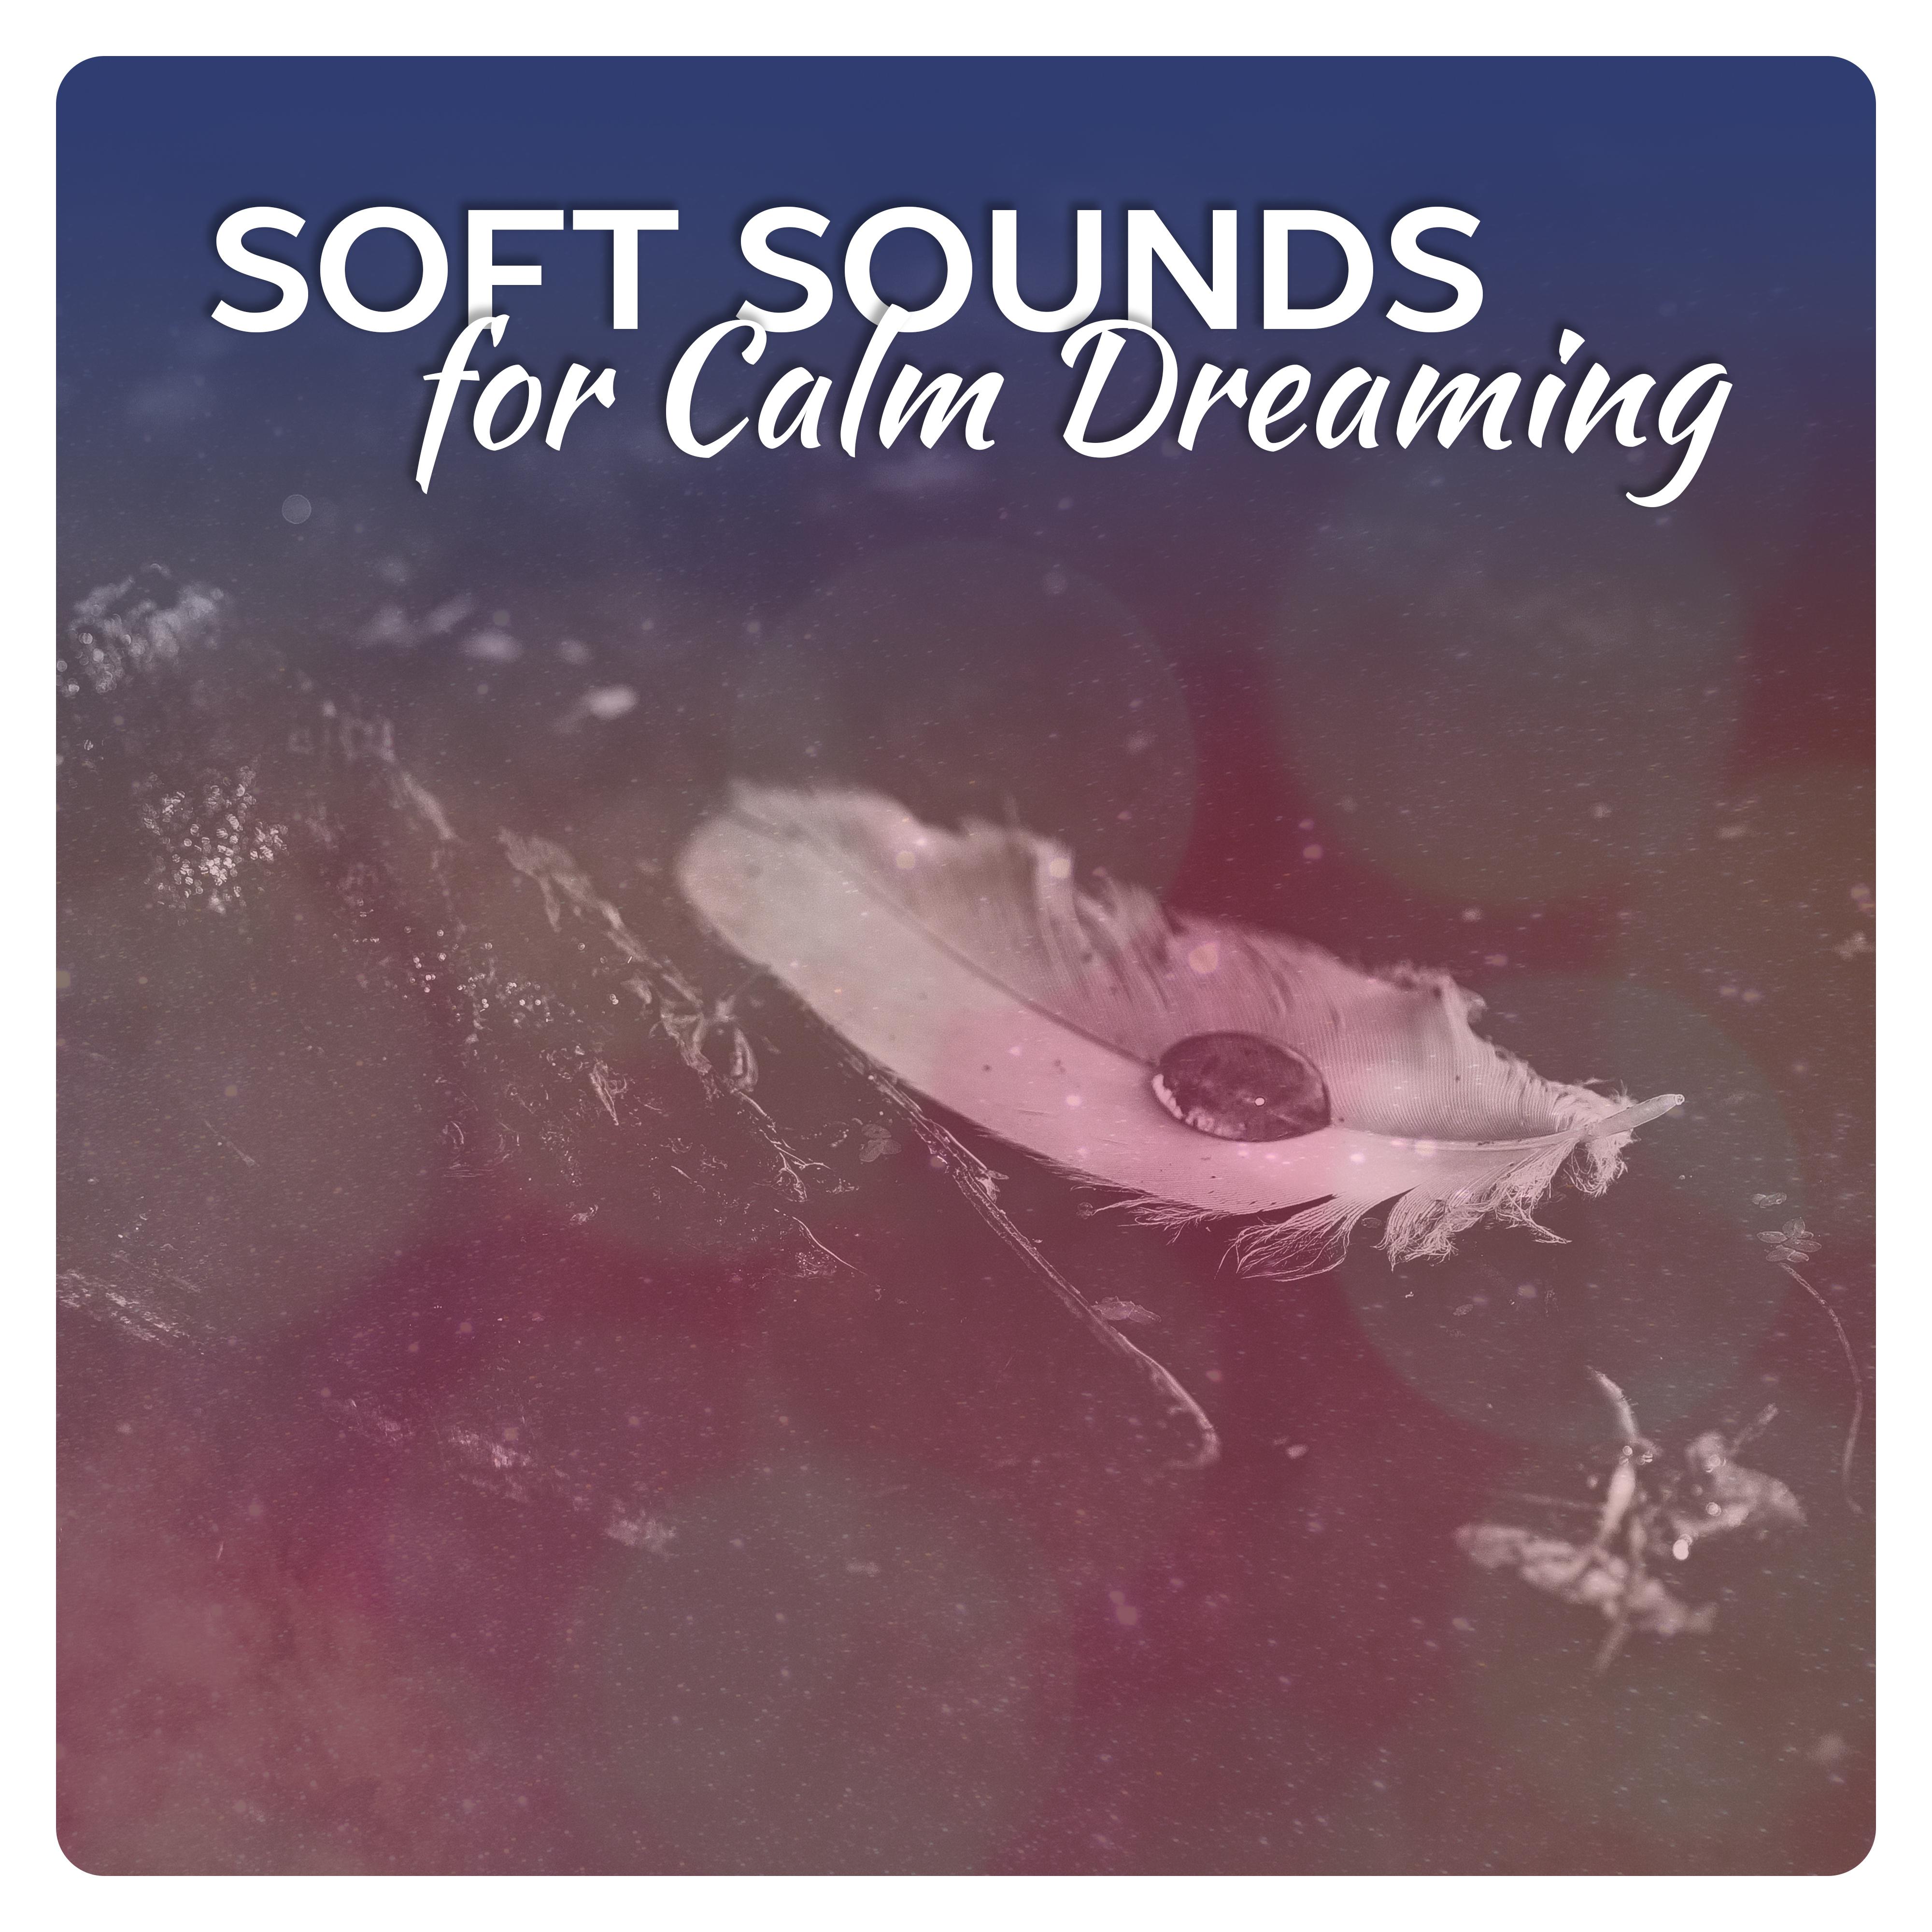 Soft Sounds for Calm Dreaming – Relaxing New Age Music, Sounds to Rest, Sleeping Hours, Easy Listening